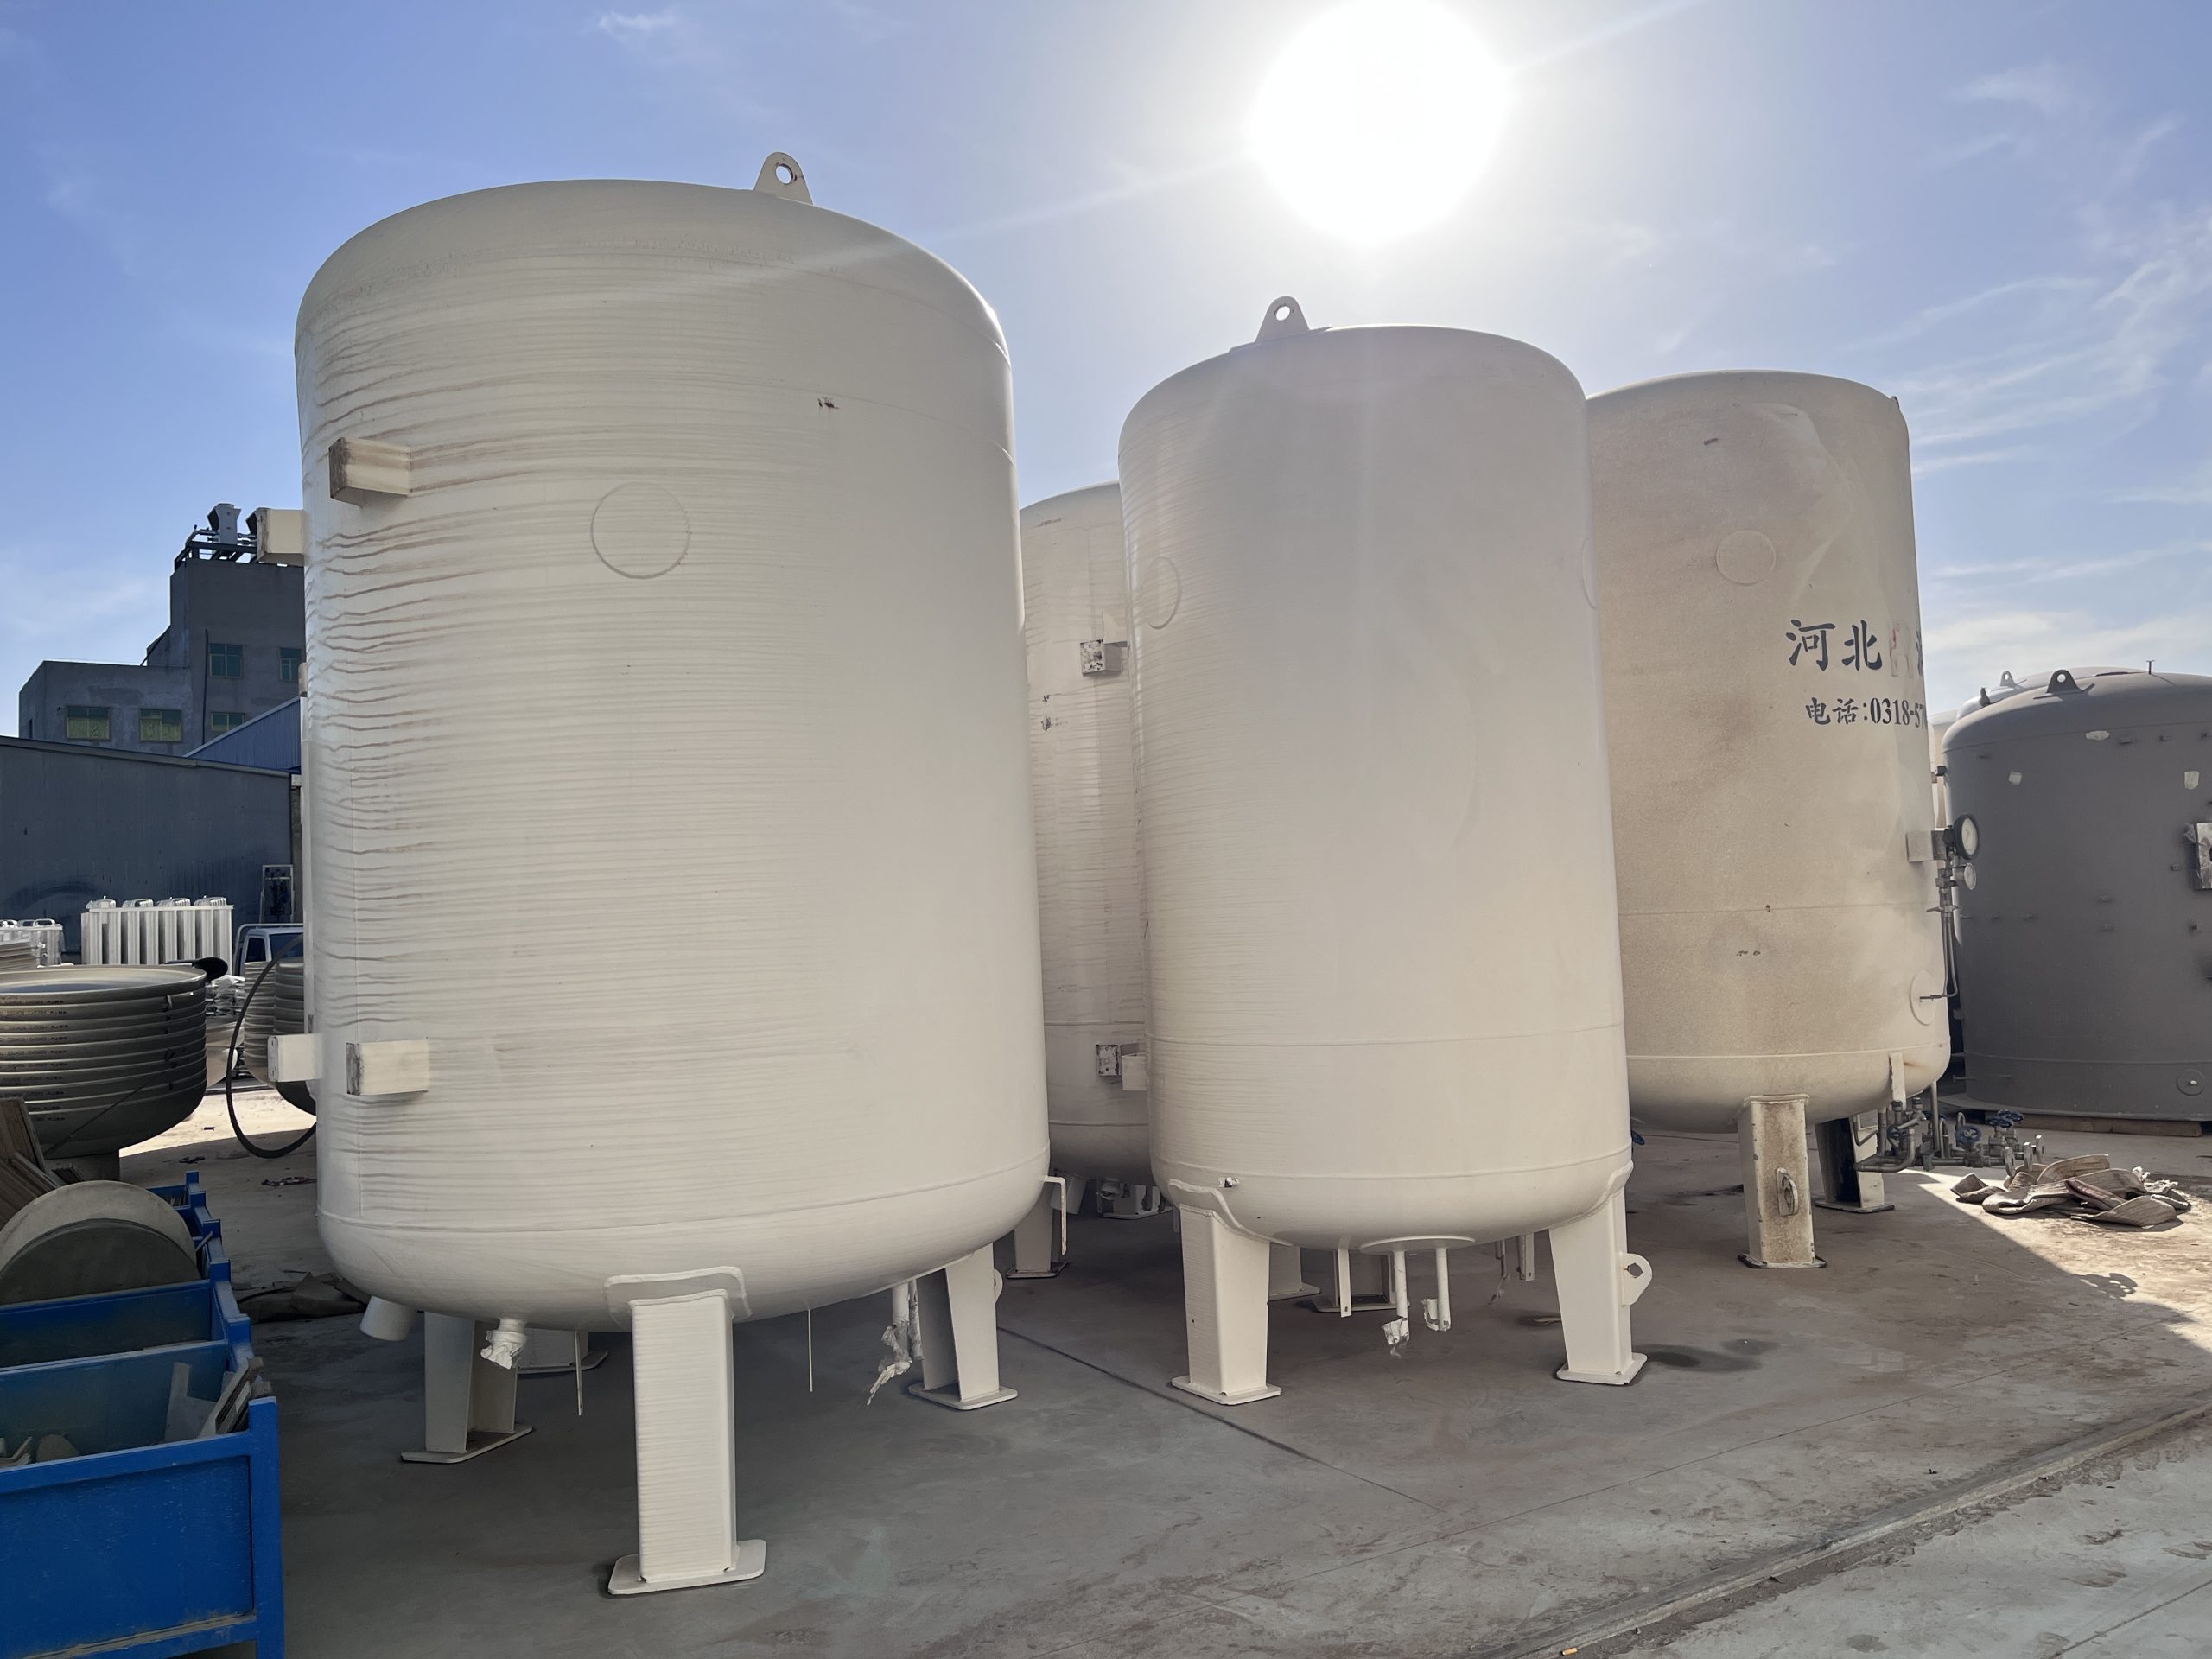 cryogenic atmospheric pressure storage tanks need to be equipped with pumps, and high requirements are placed on the pumps